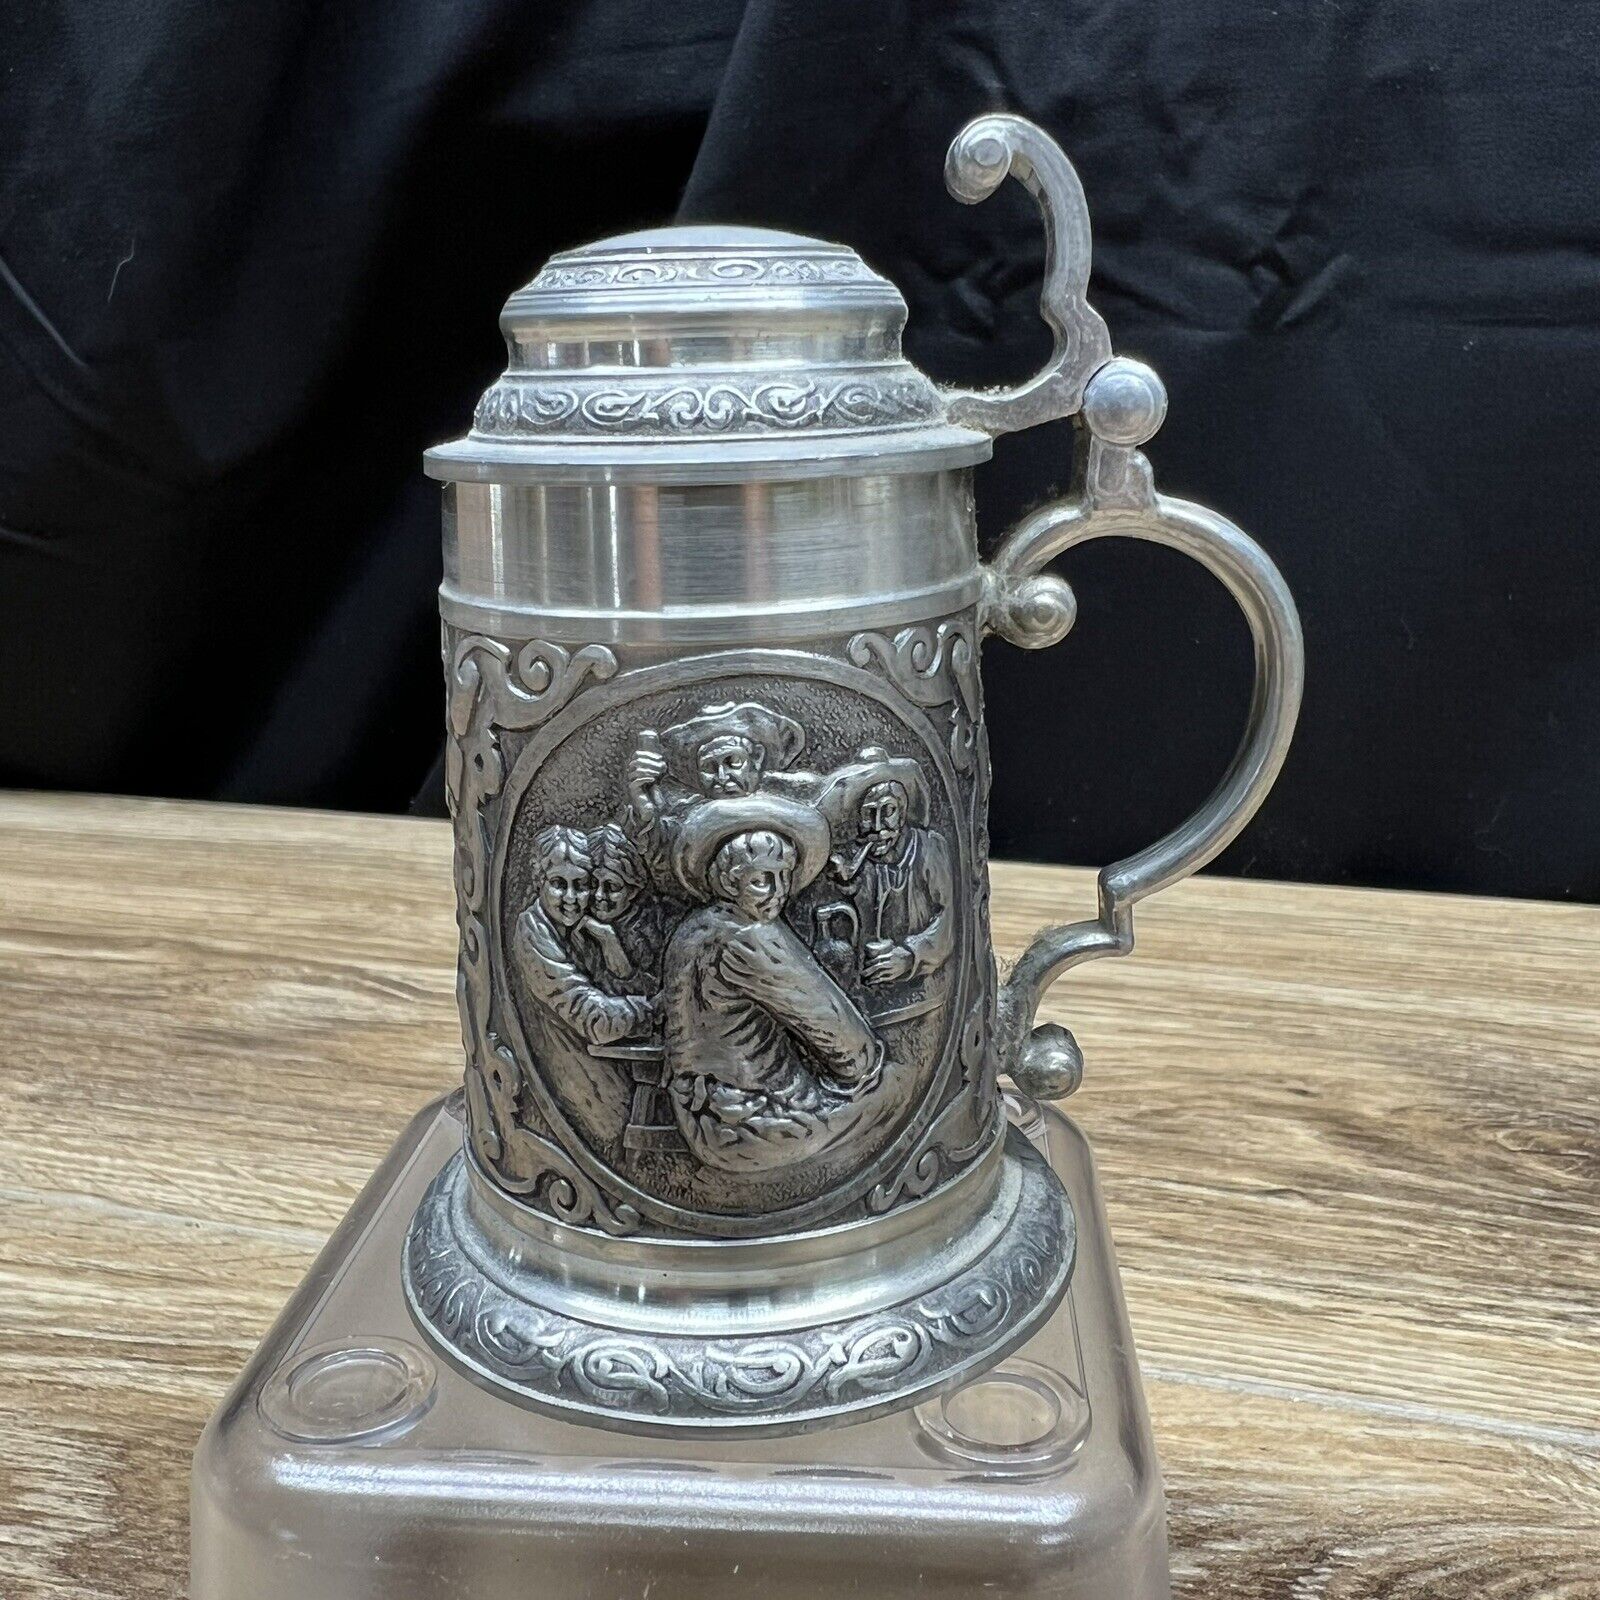 Mini Pewter Stein Collectible SKS Zinn 95% (3 1/2”) Germany